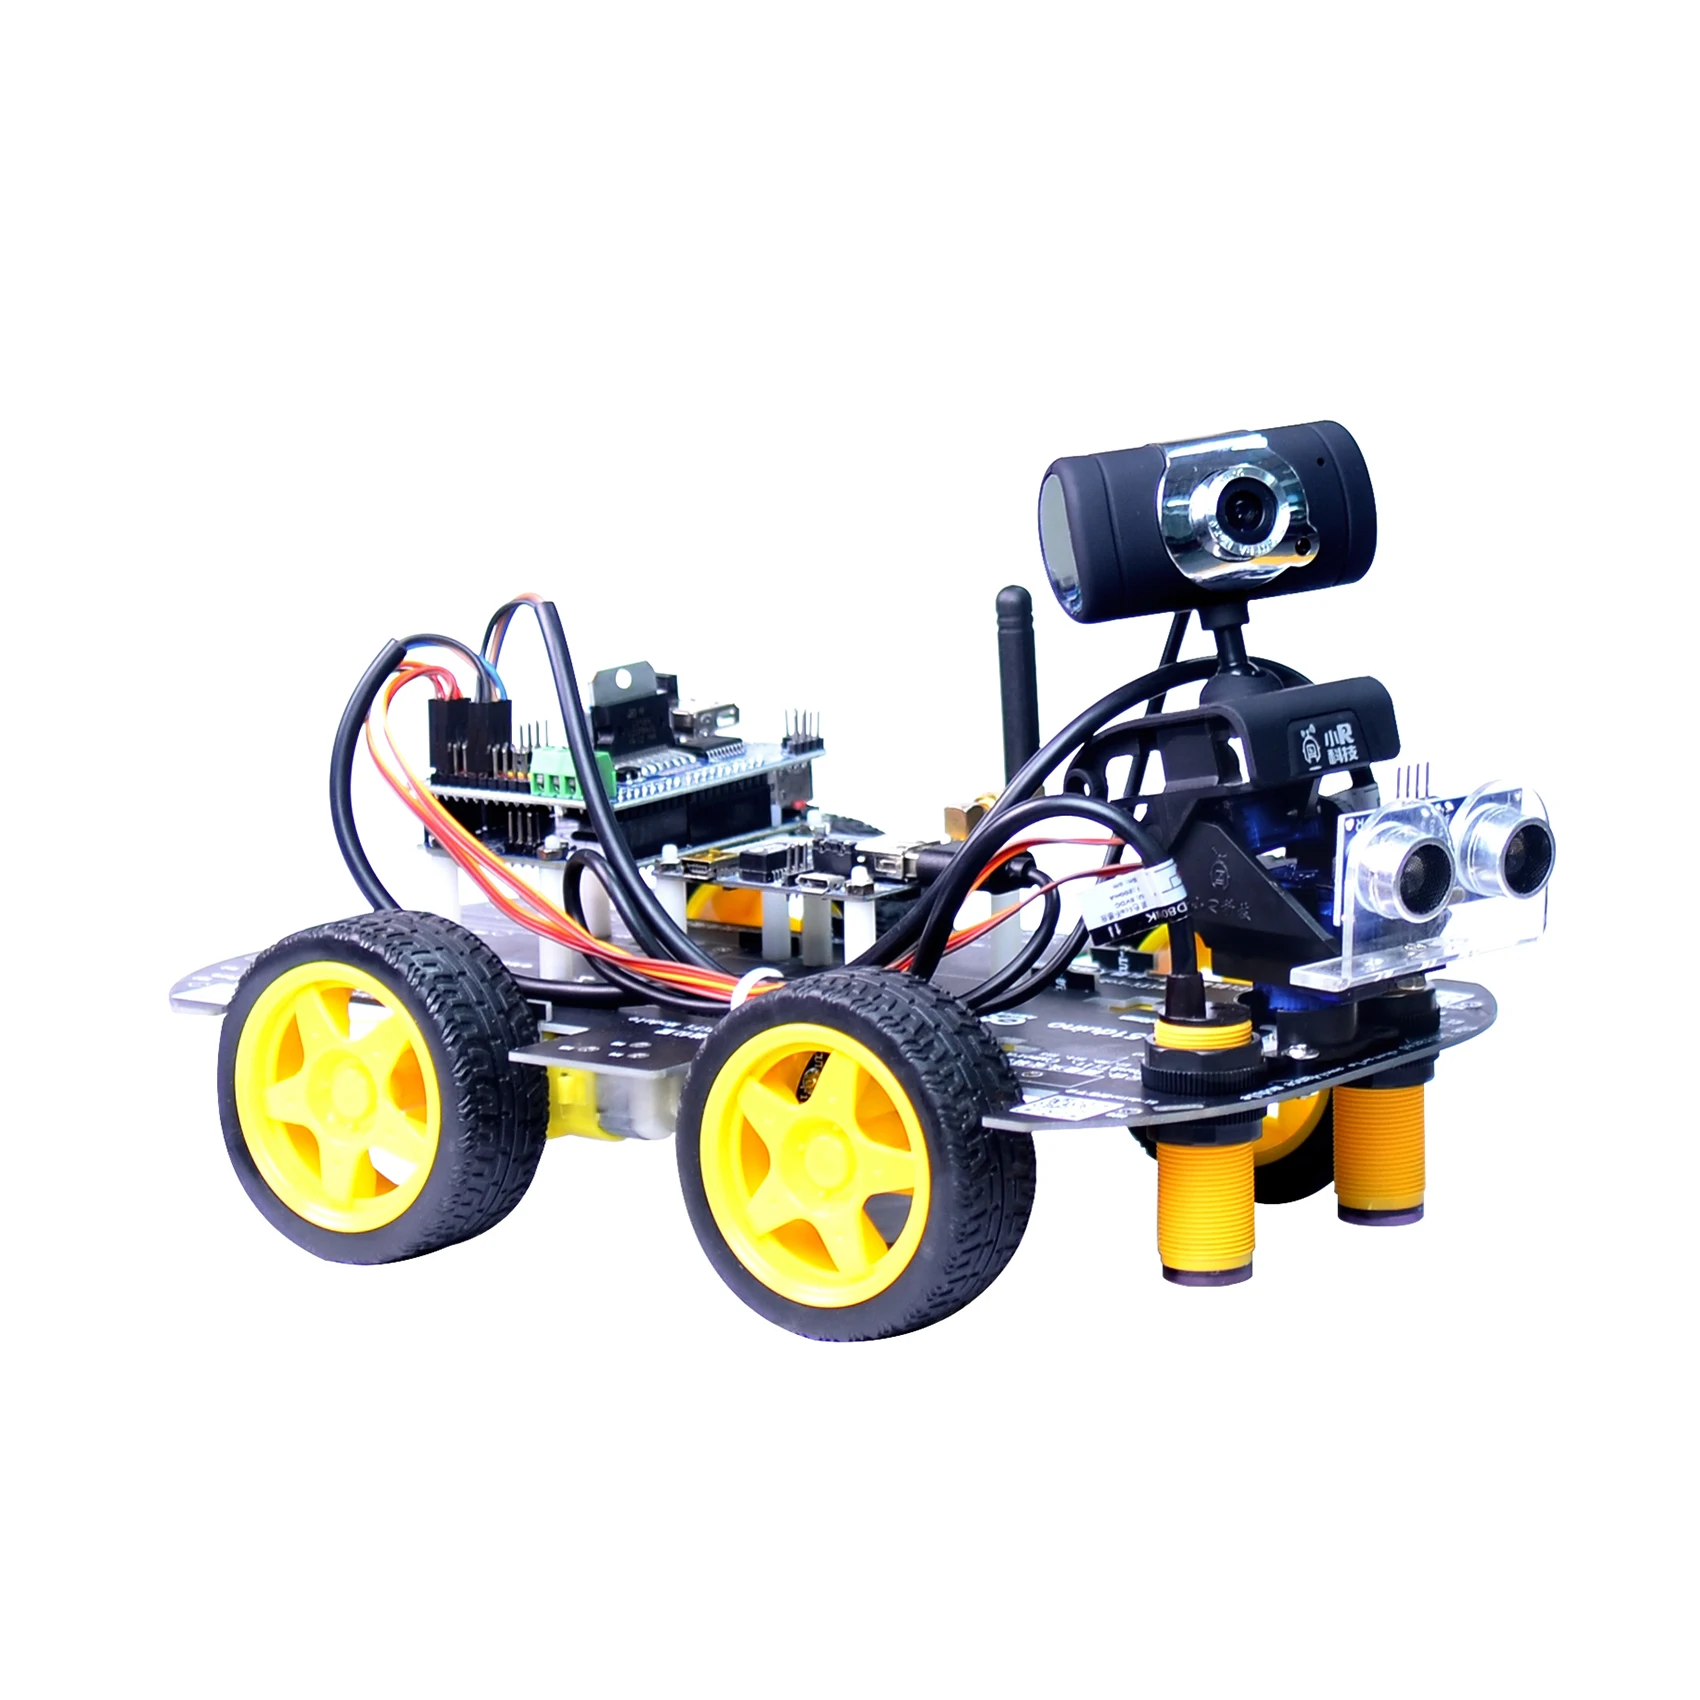 
programmable robotic kits XIAORGEEK DIY DS Robot Car Kit with Arduino for Education 